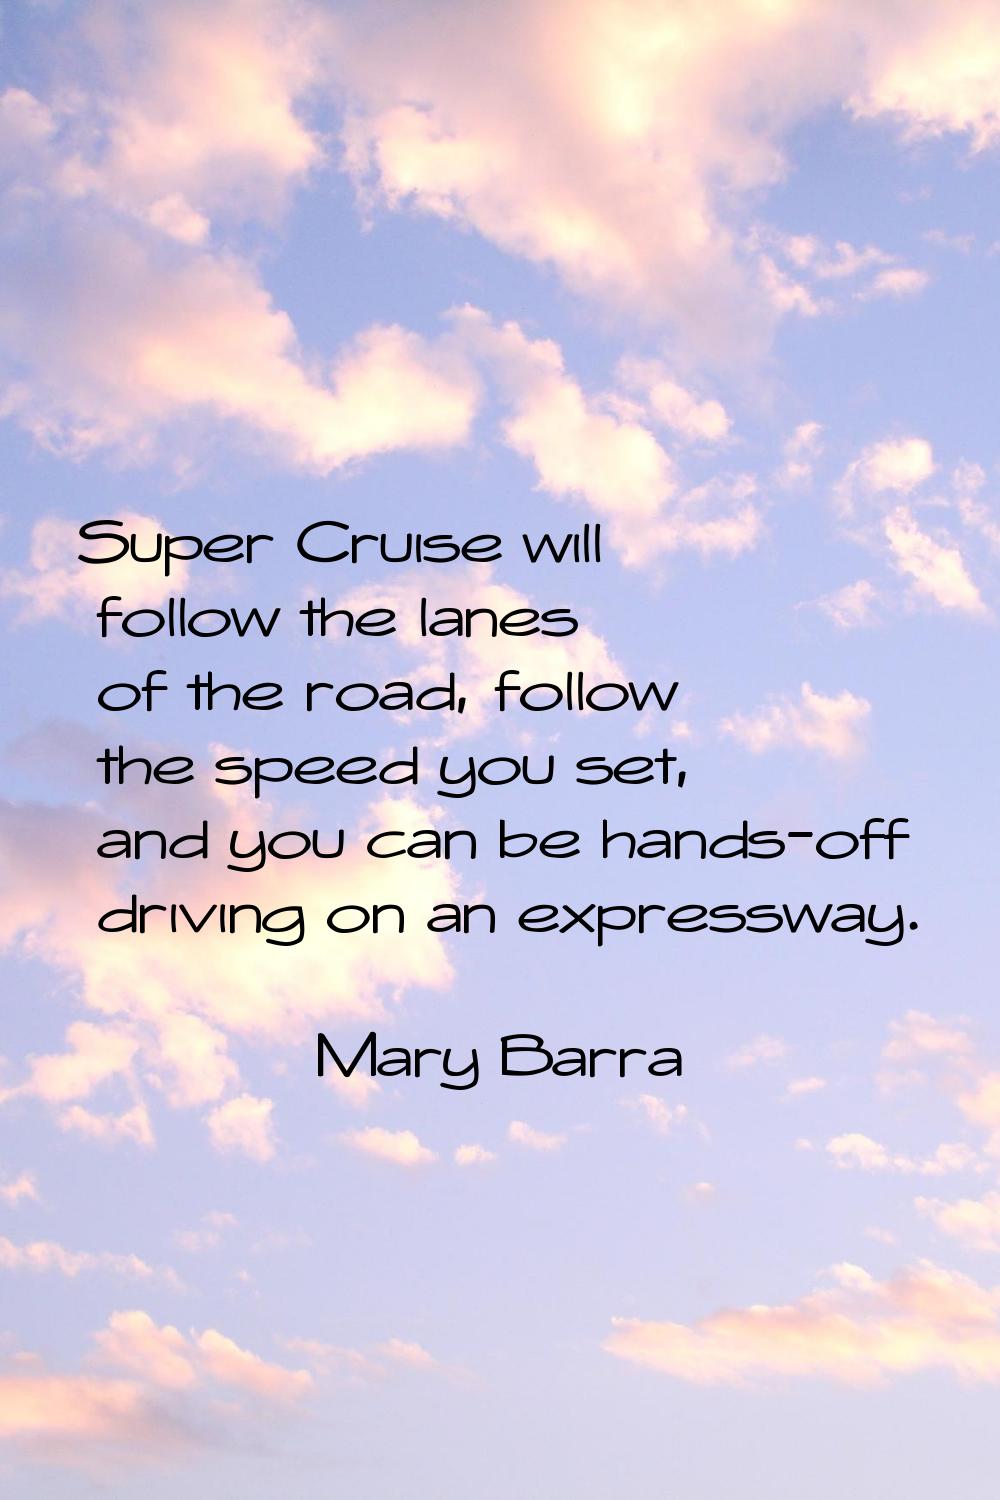 Super Cruise will follow the lanes of the road, follow the speed you set, and you can be hands-off 